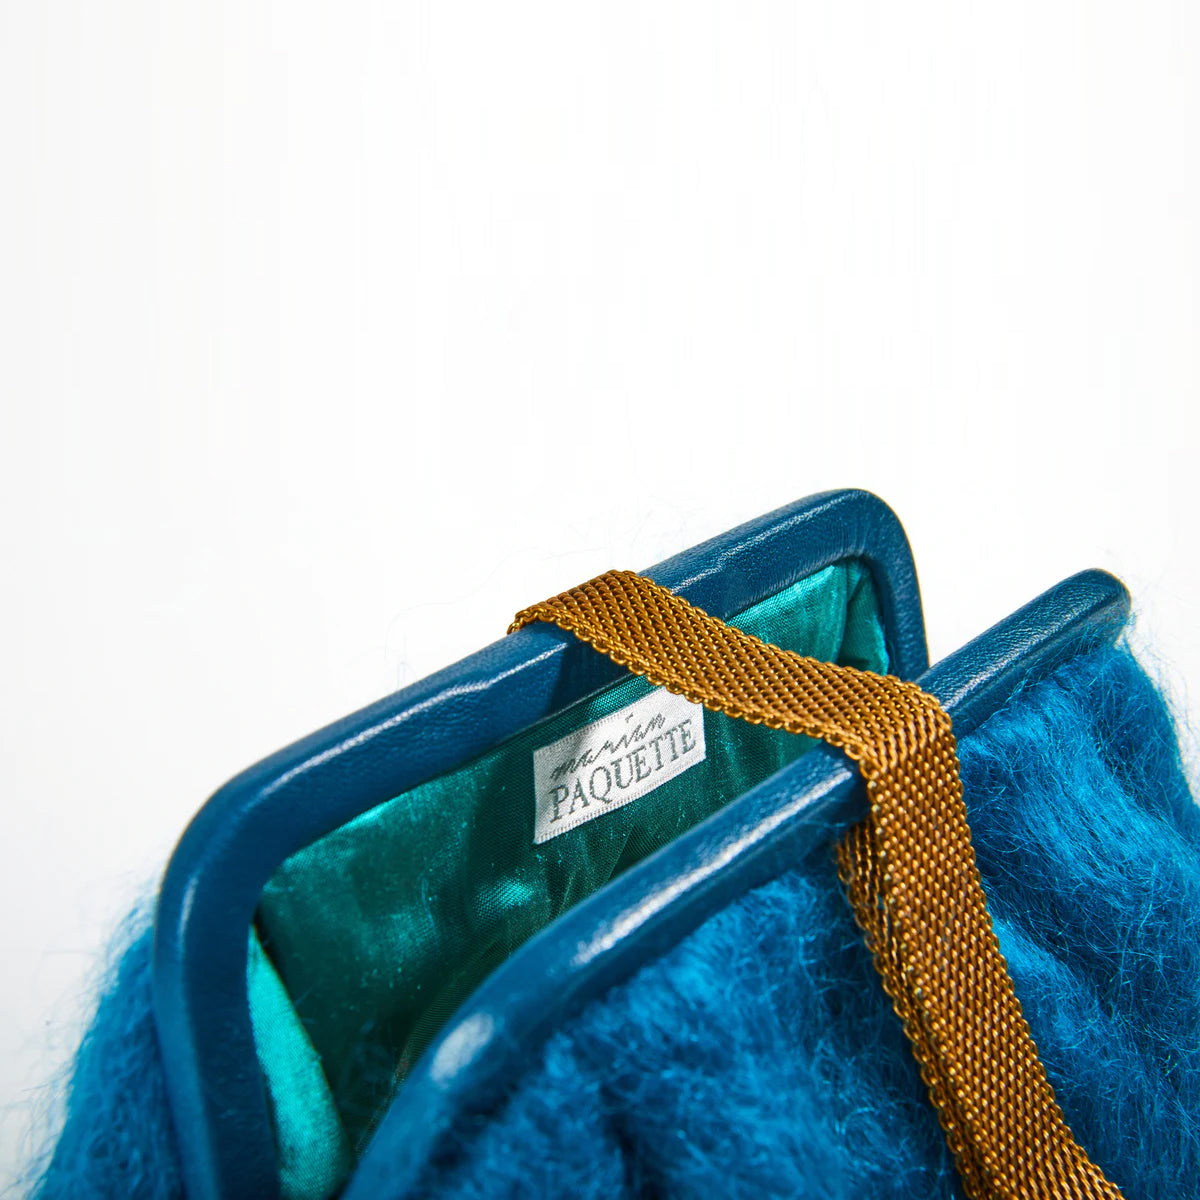 Marian Paquette Susan Mohair Clutch with Vintage Chain Teal